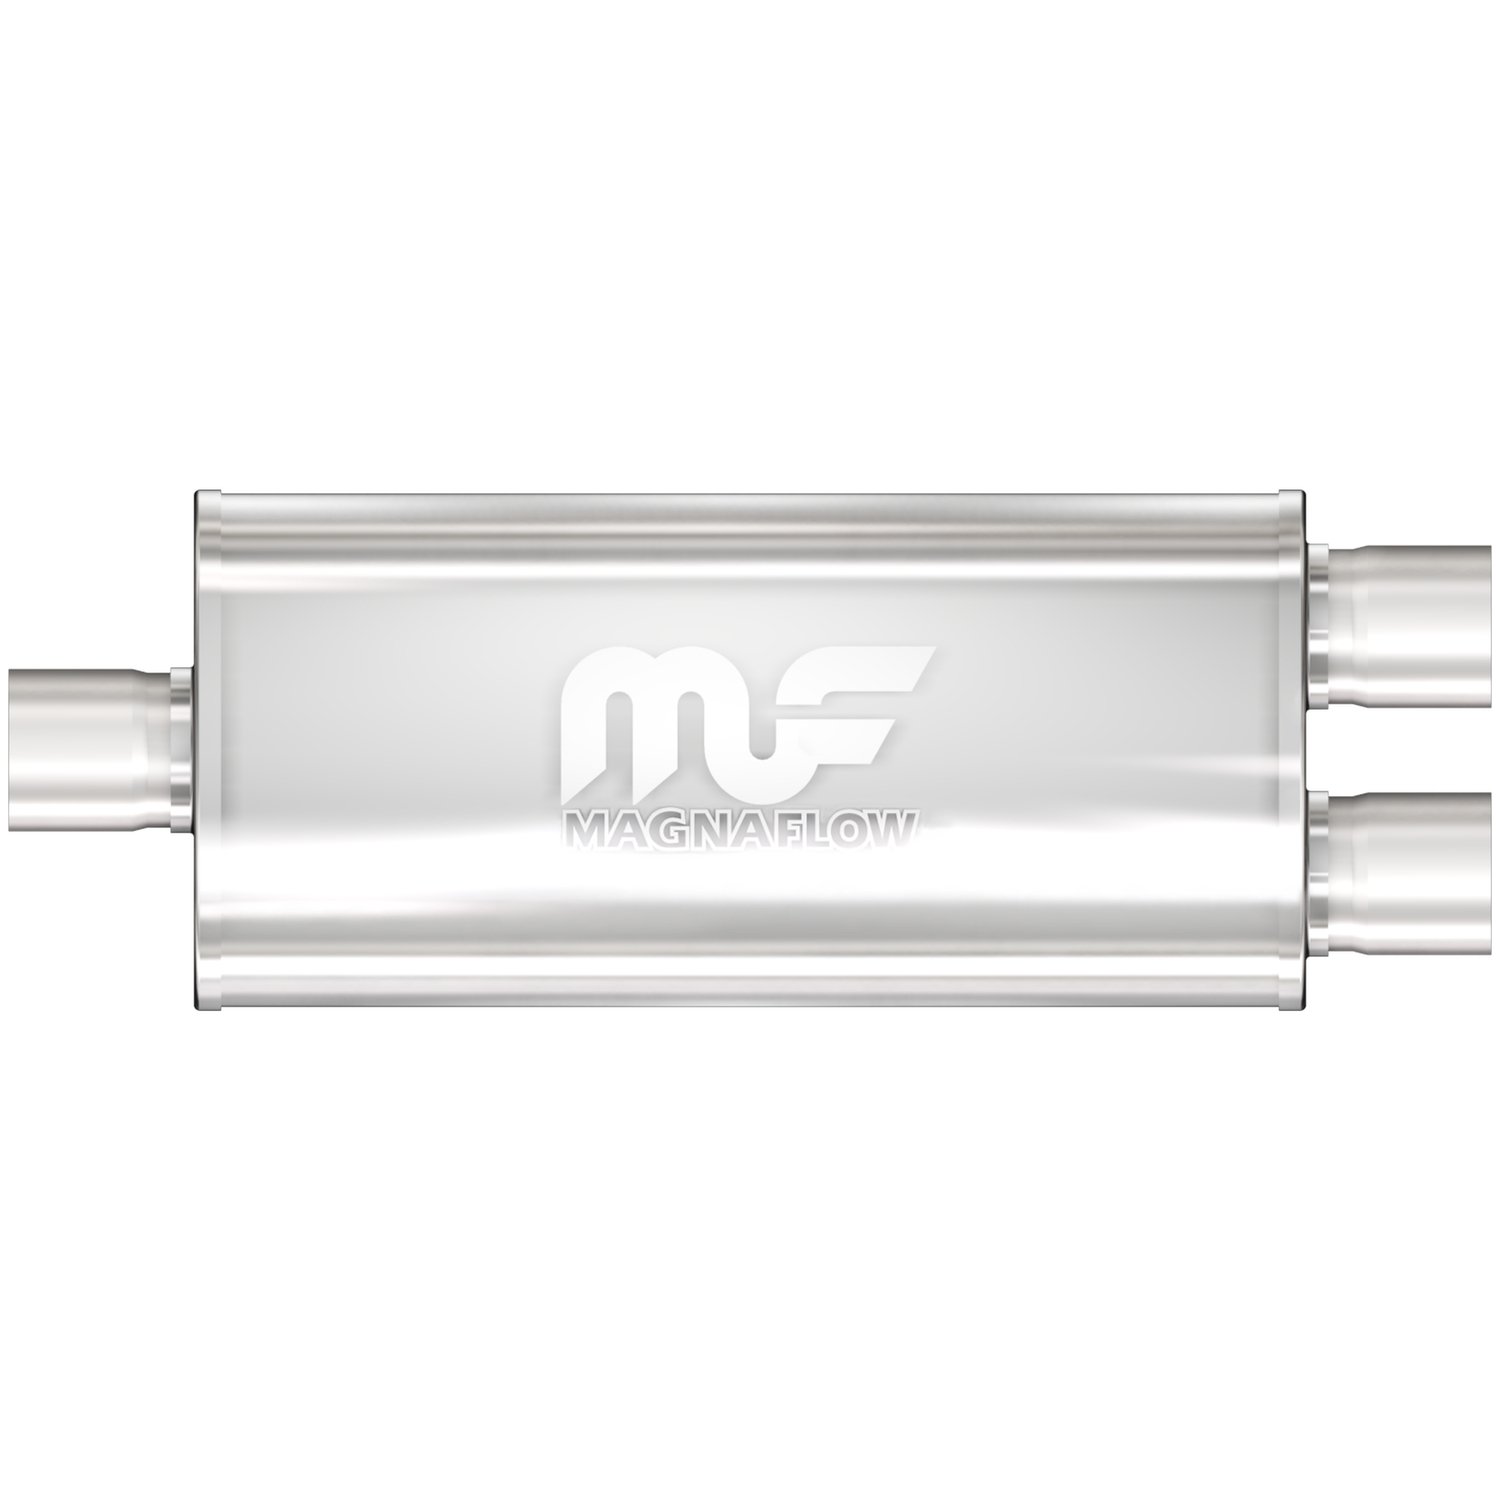 5" x 8" Oval Muffler Center In/Dual Out: 3" /2.25" Body Length: 18" Overall Length: 24" Core Size: 3" Satin Finish